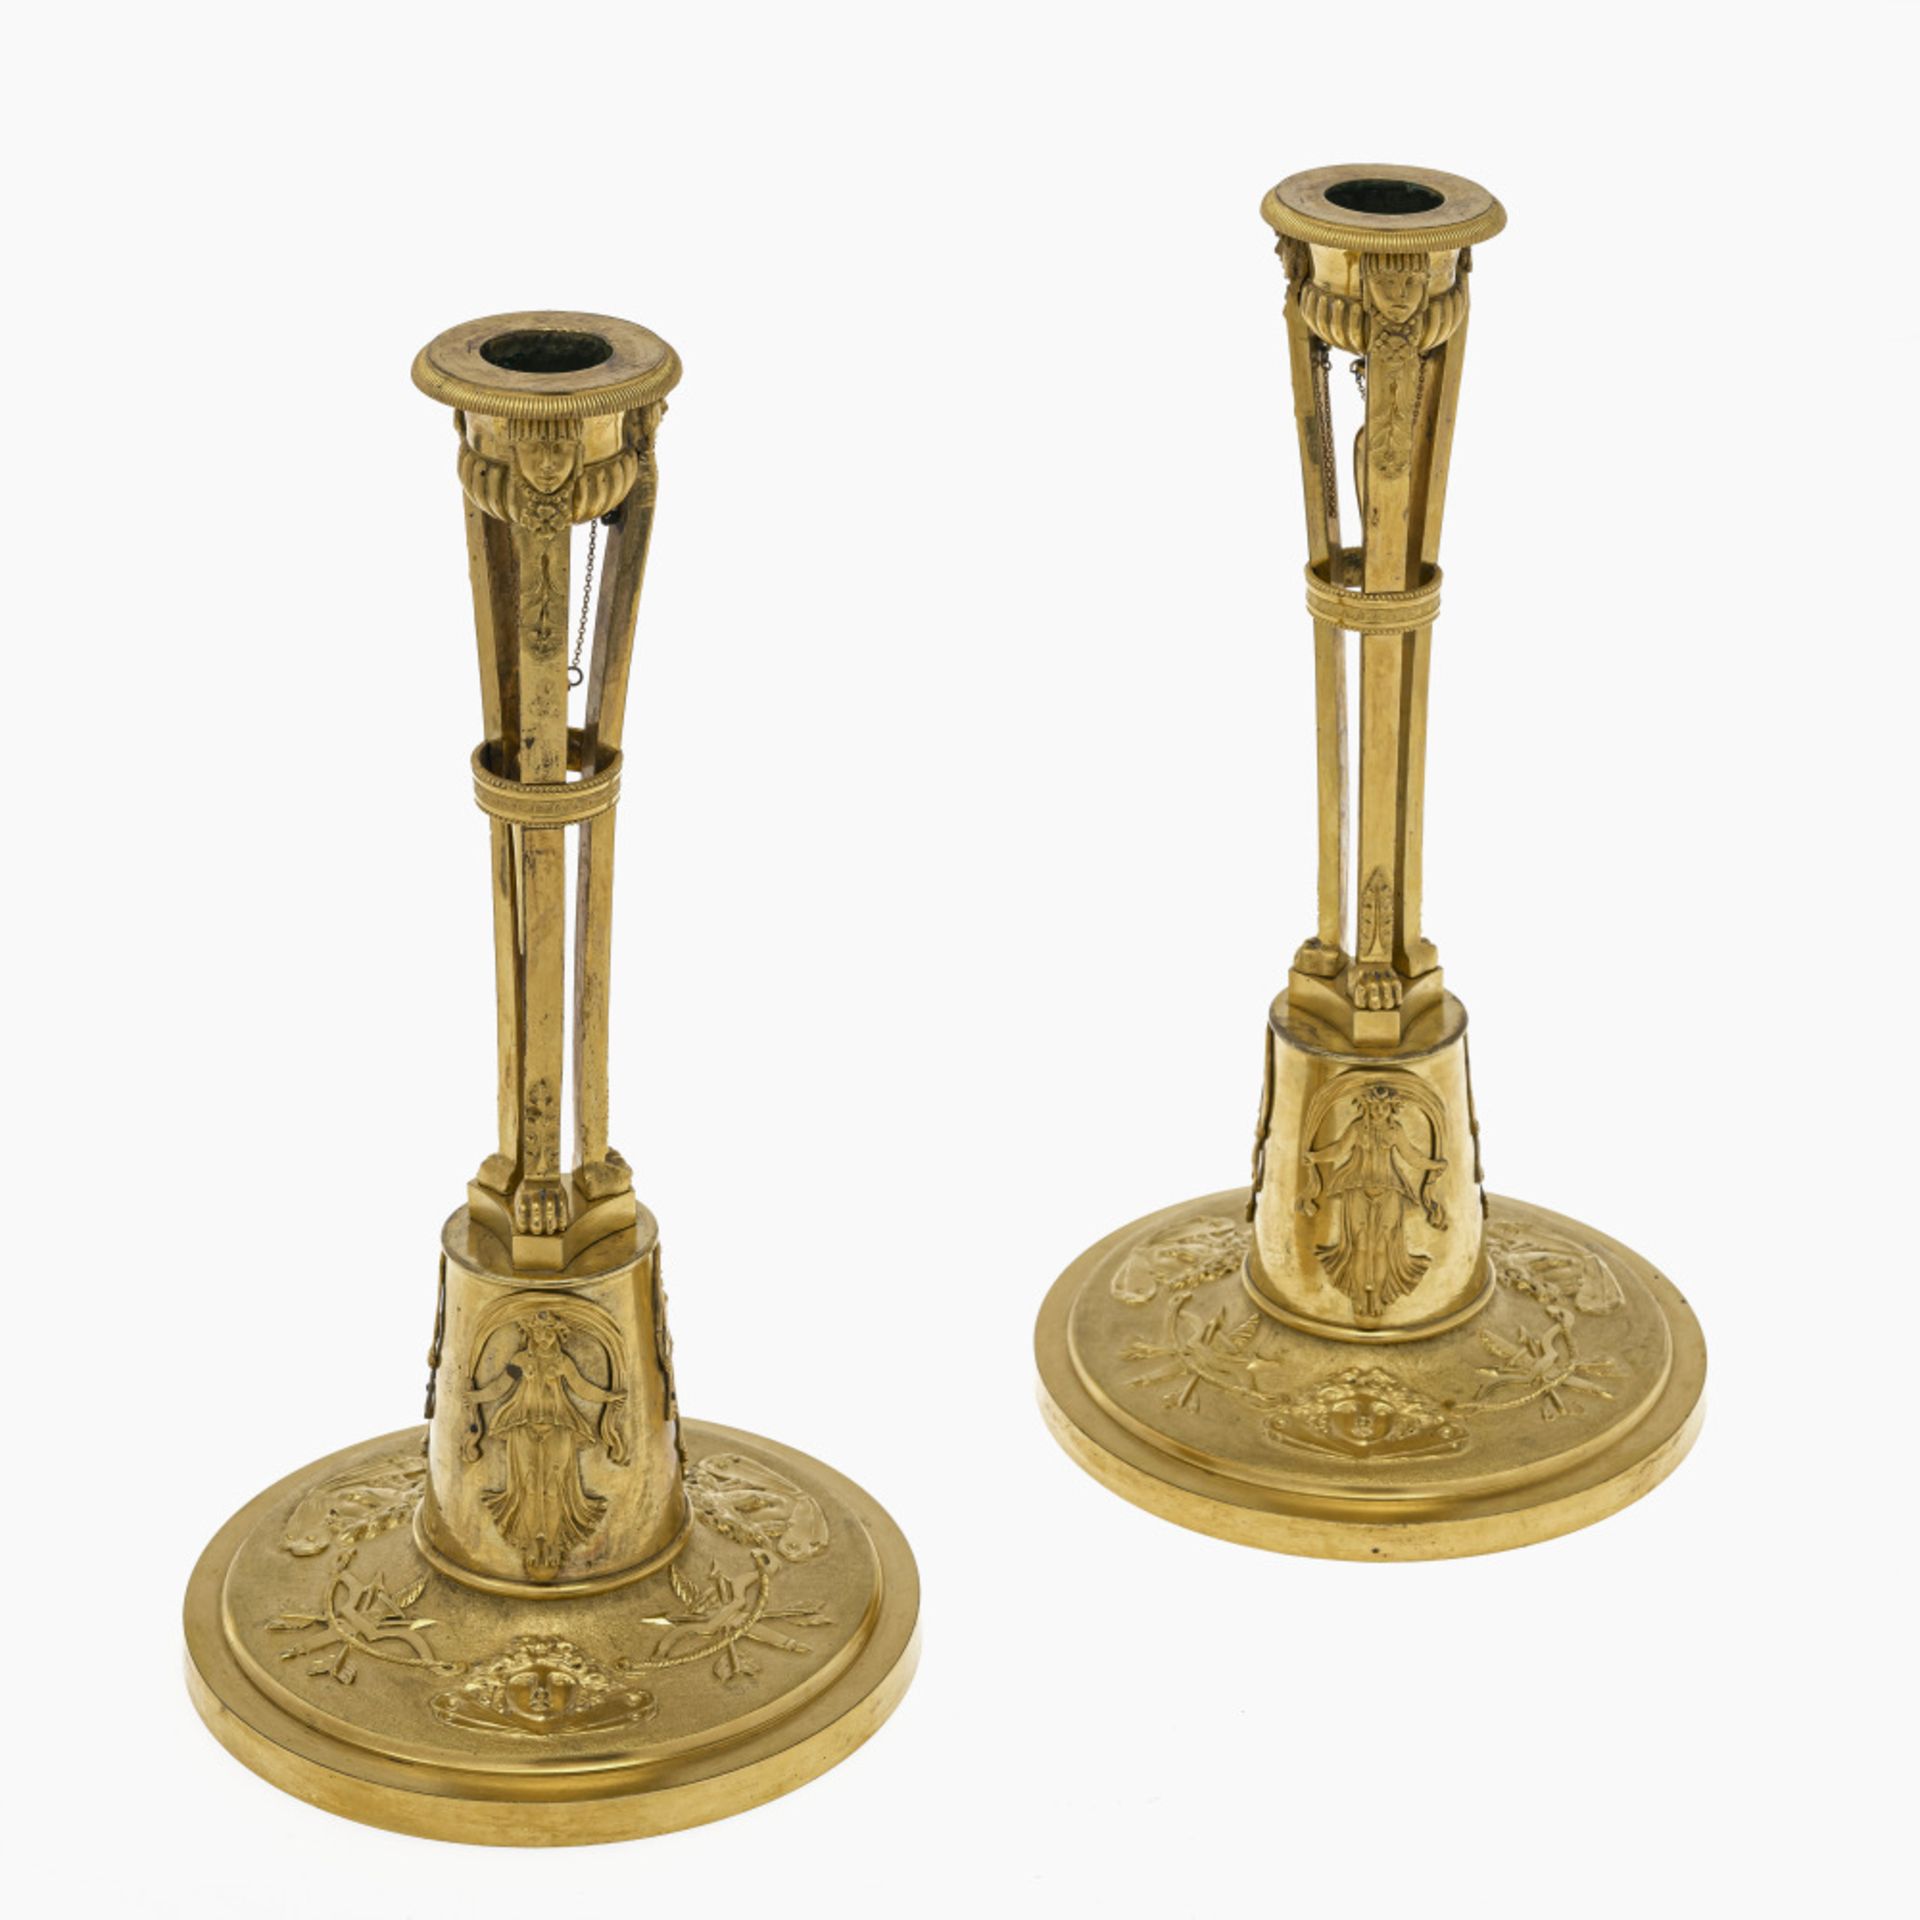 A pair of candlesticks - France (Paris), first third of the 19th century